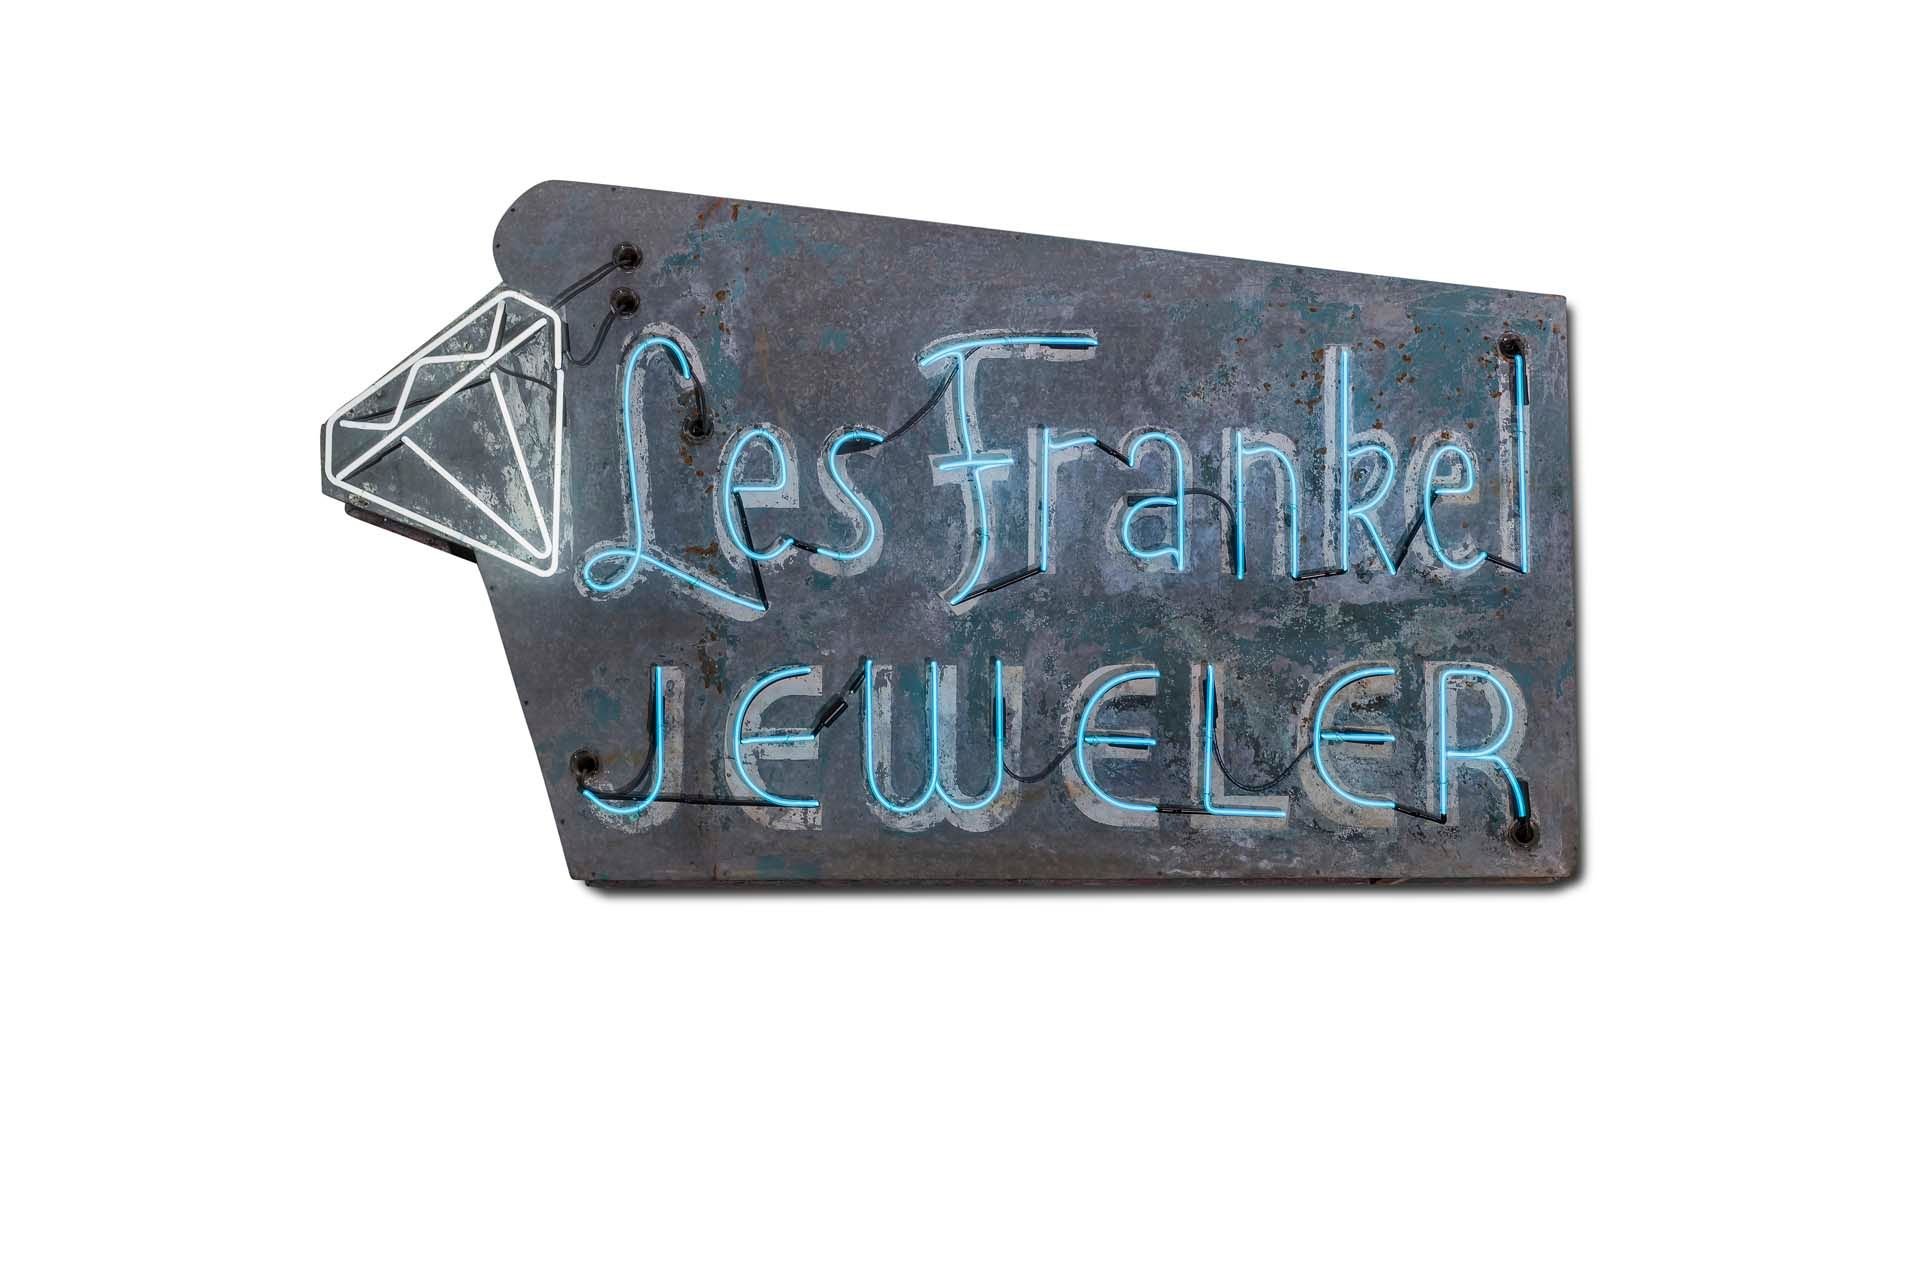 For Sale 'Les Frankel Jeweler' Neon Sign, Double-sided